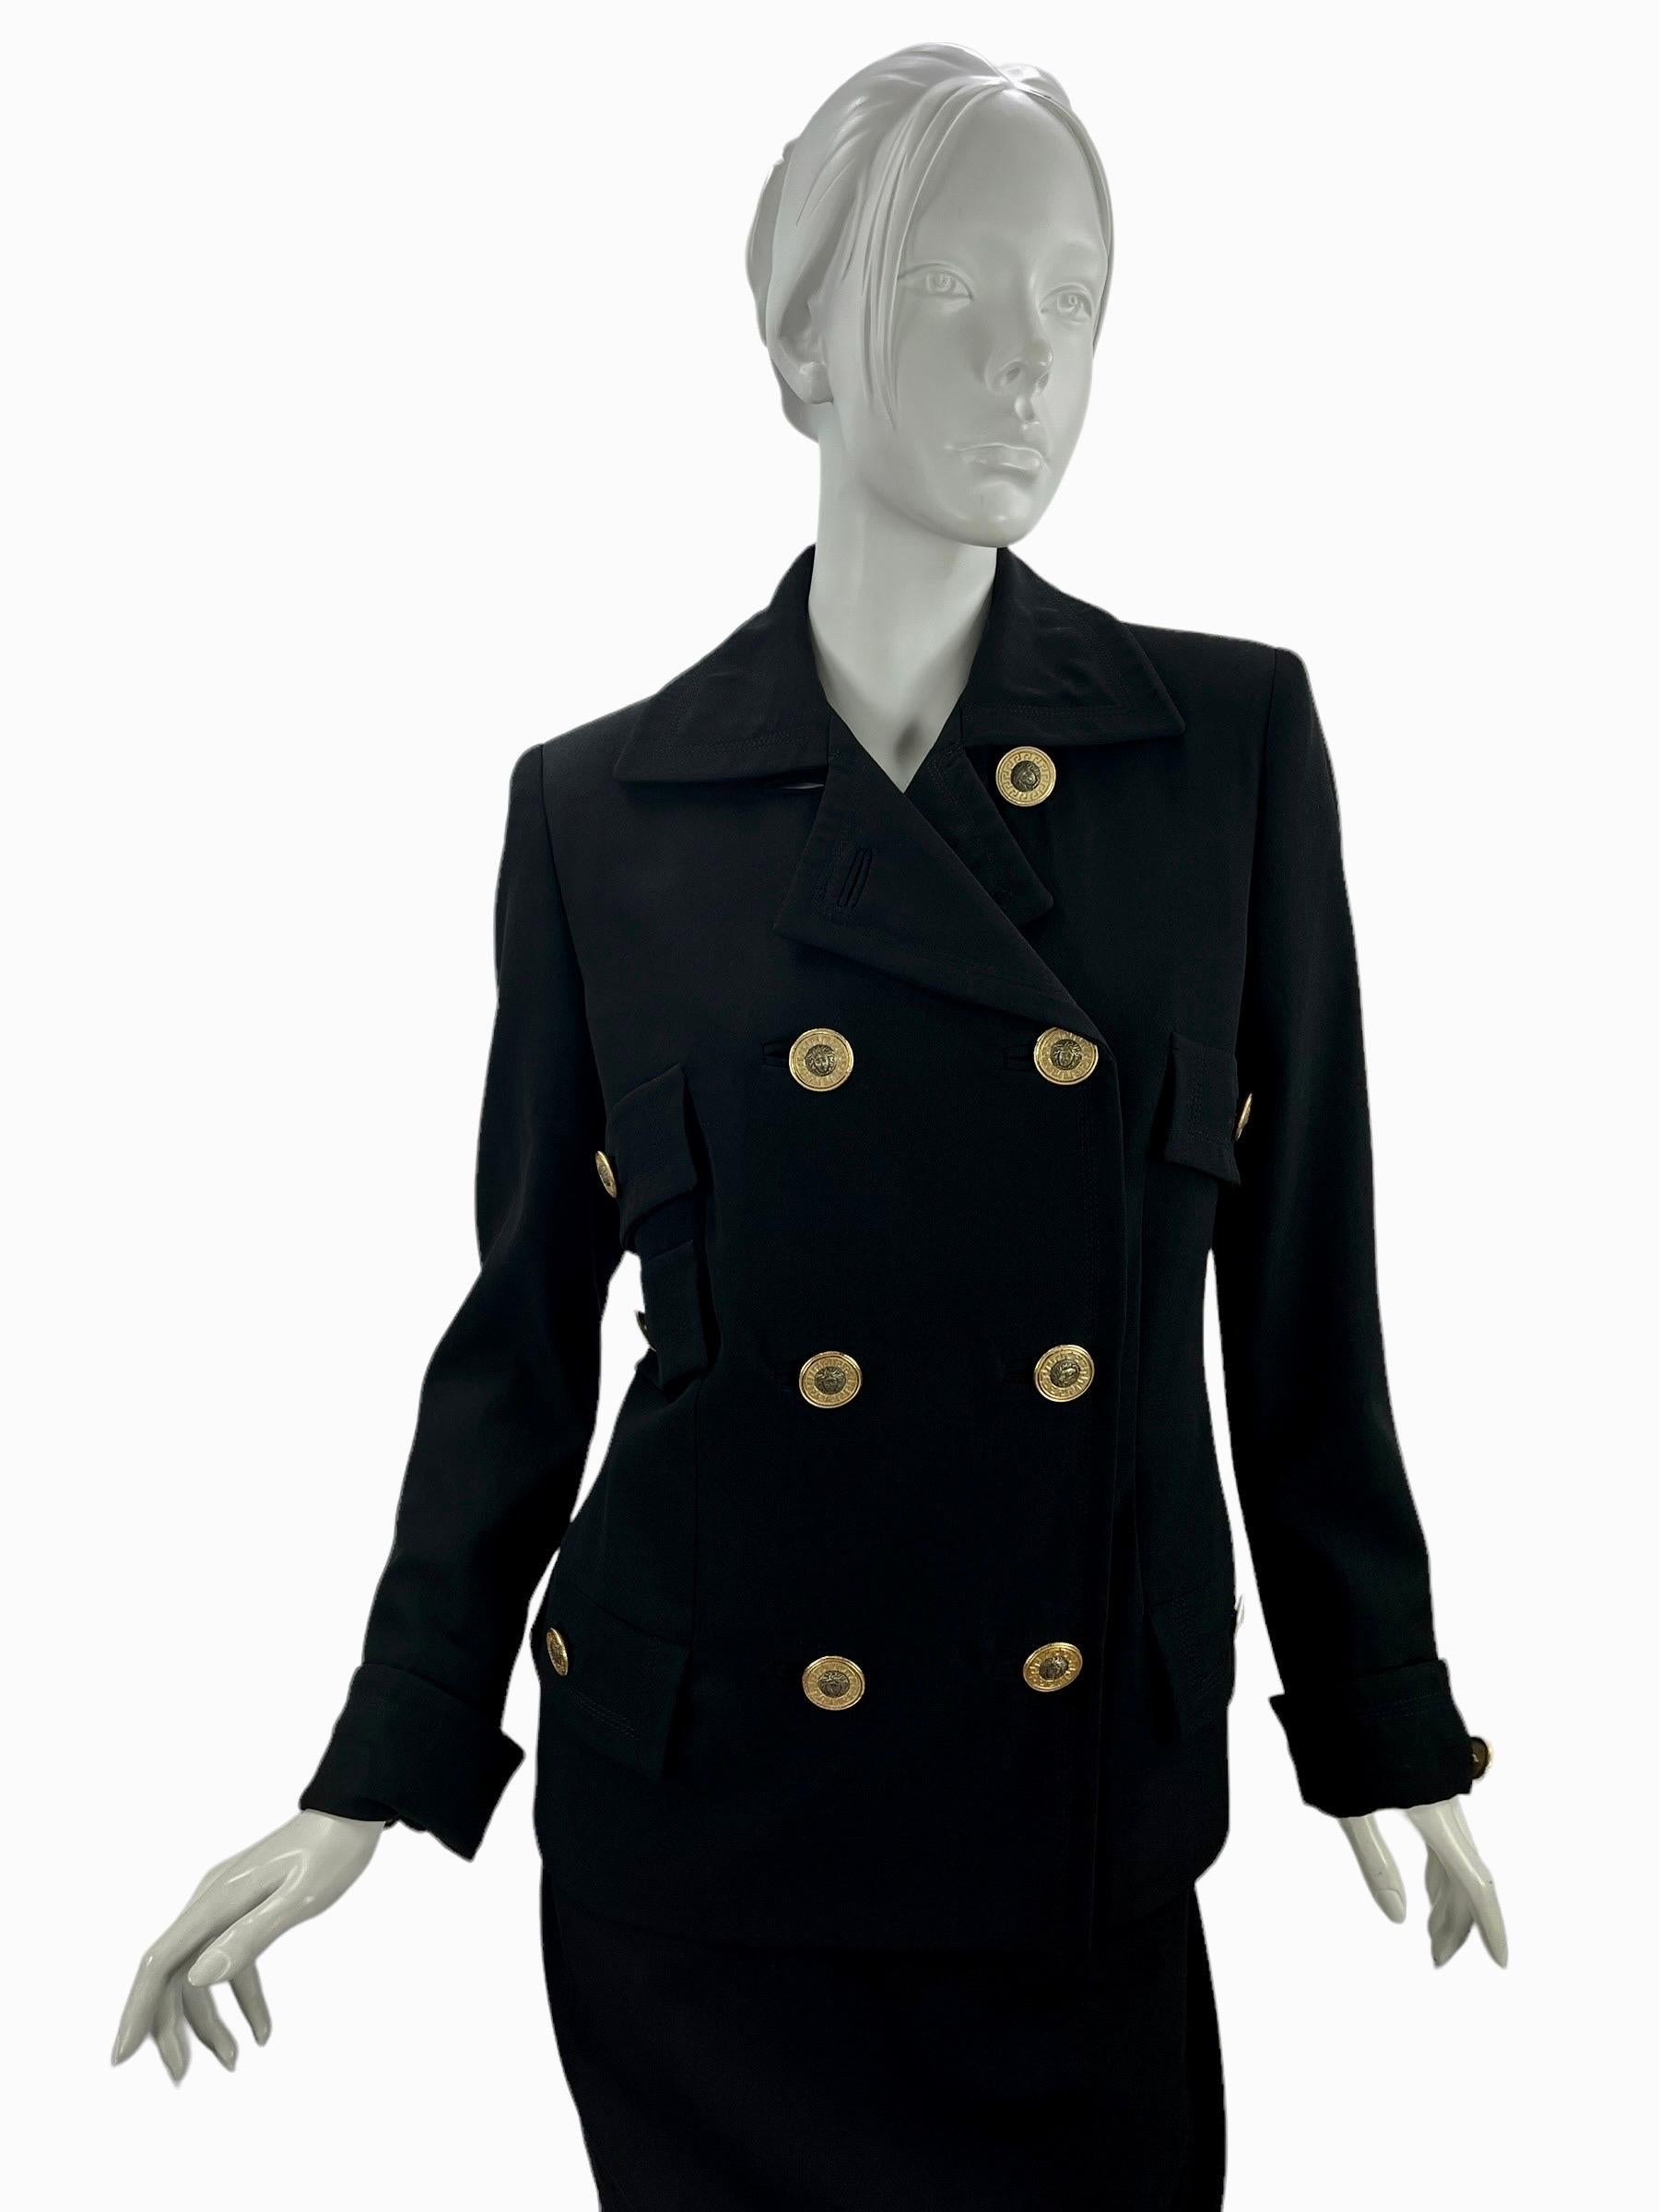 Gianni Versace Couture Black Blazer and Long Skirt Suit
1993 Runway collection. Black label.
Italian size 40
100% Wool 
Blazer: Shoulders - 16 3/4 inches, Sleeve - 24